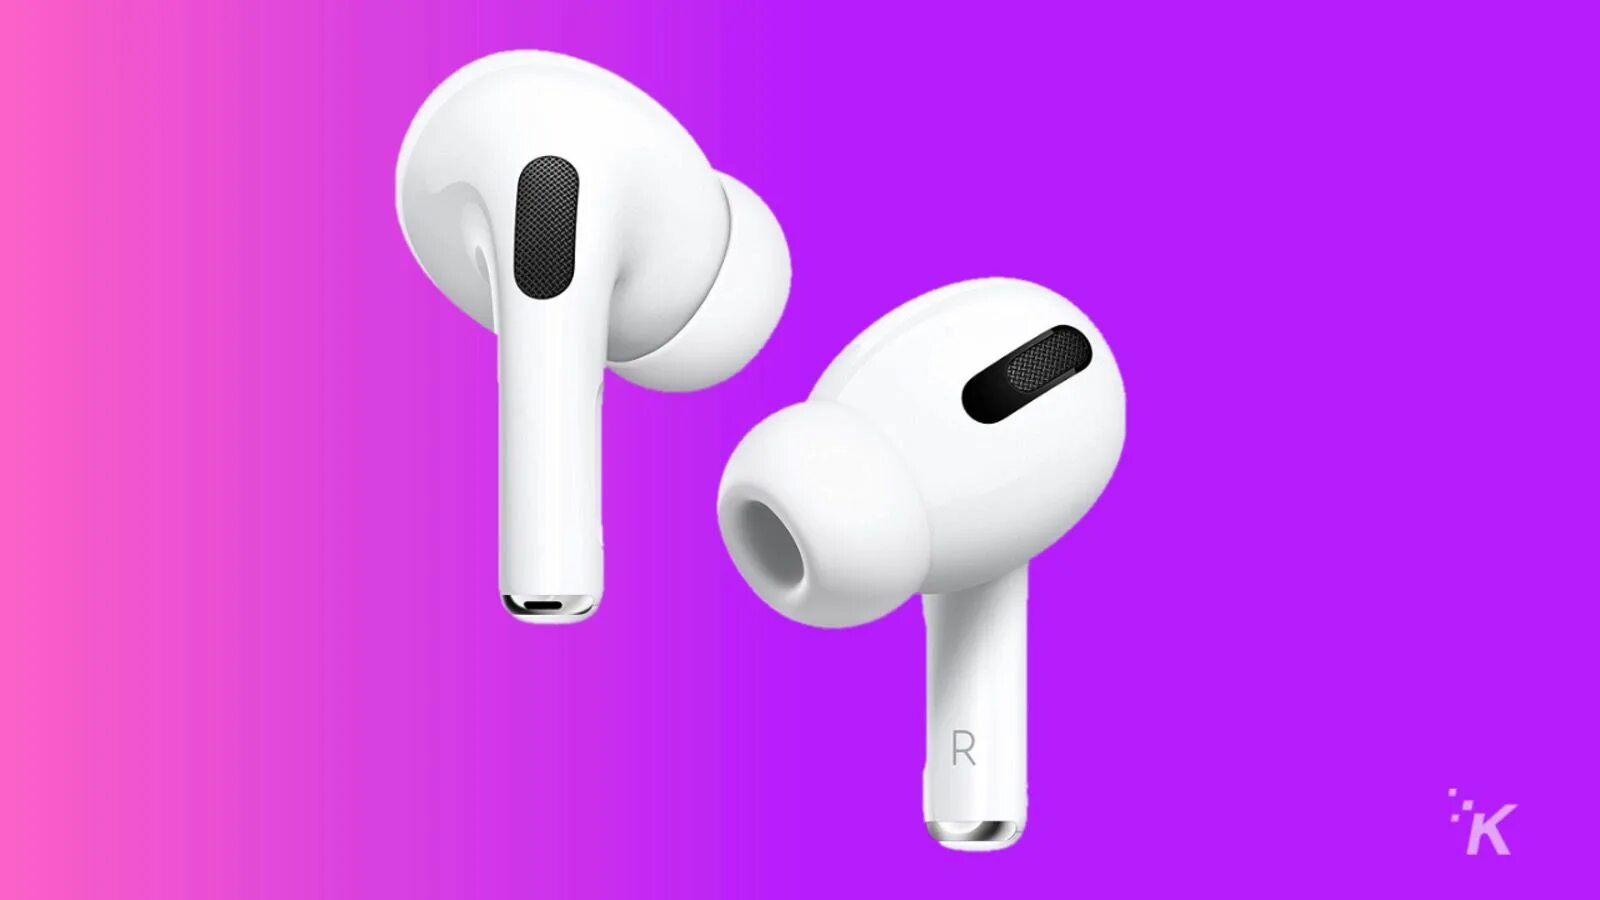 Windows 11 airpods. AIRPODS Pro 4. AIRPODS Pro Lite. AIRPODS Pro релиз. AIRPODS Pro 4 Mini.